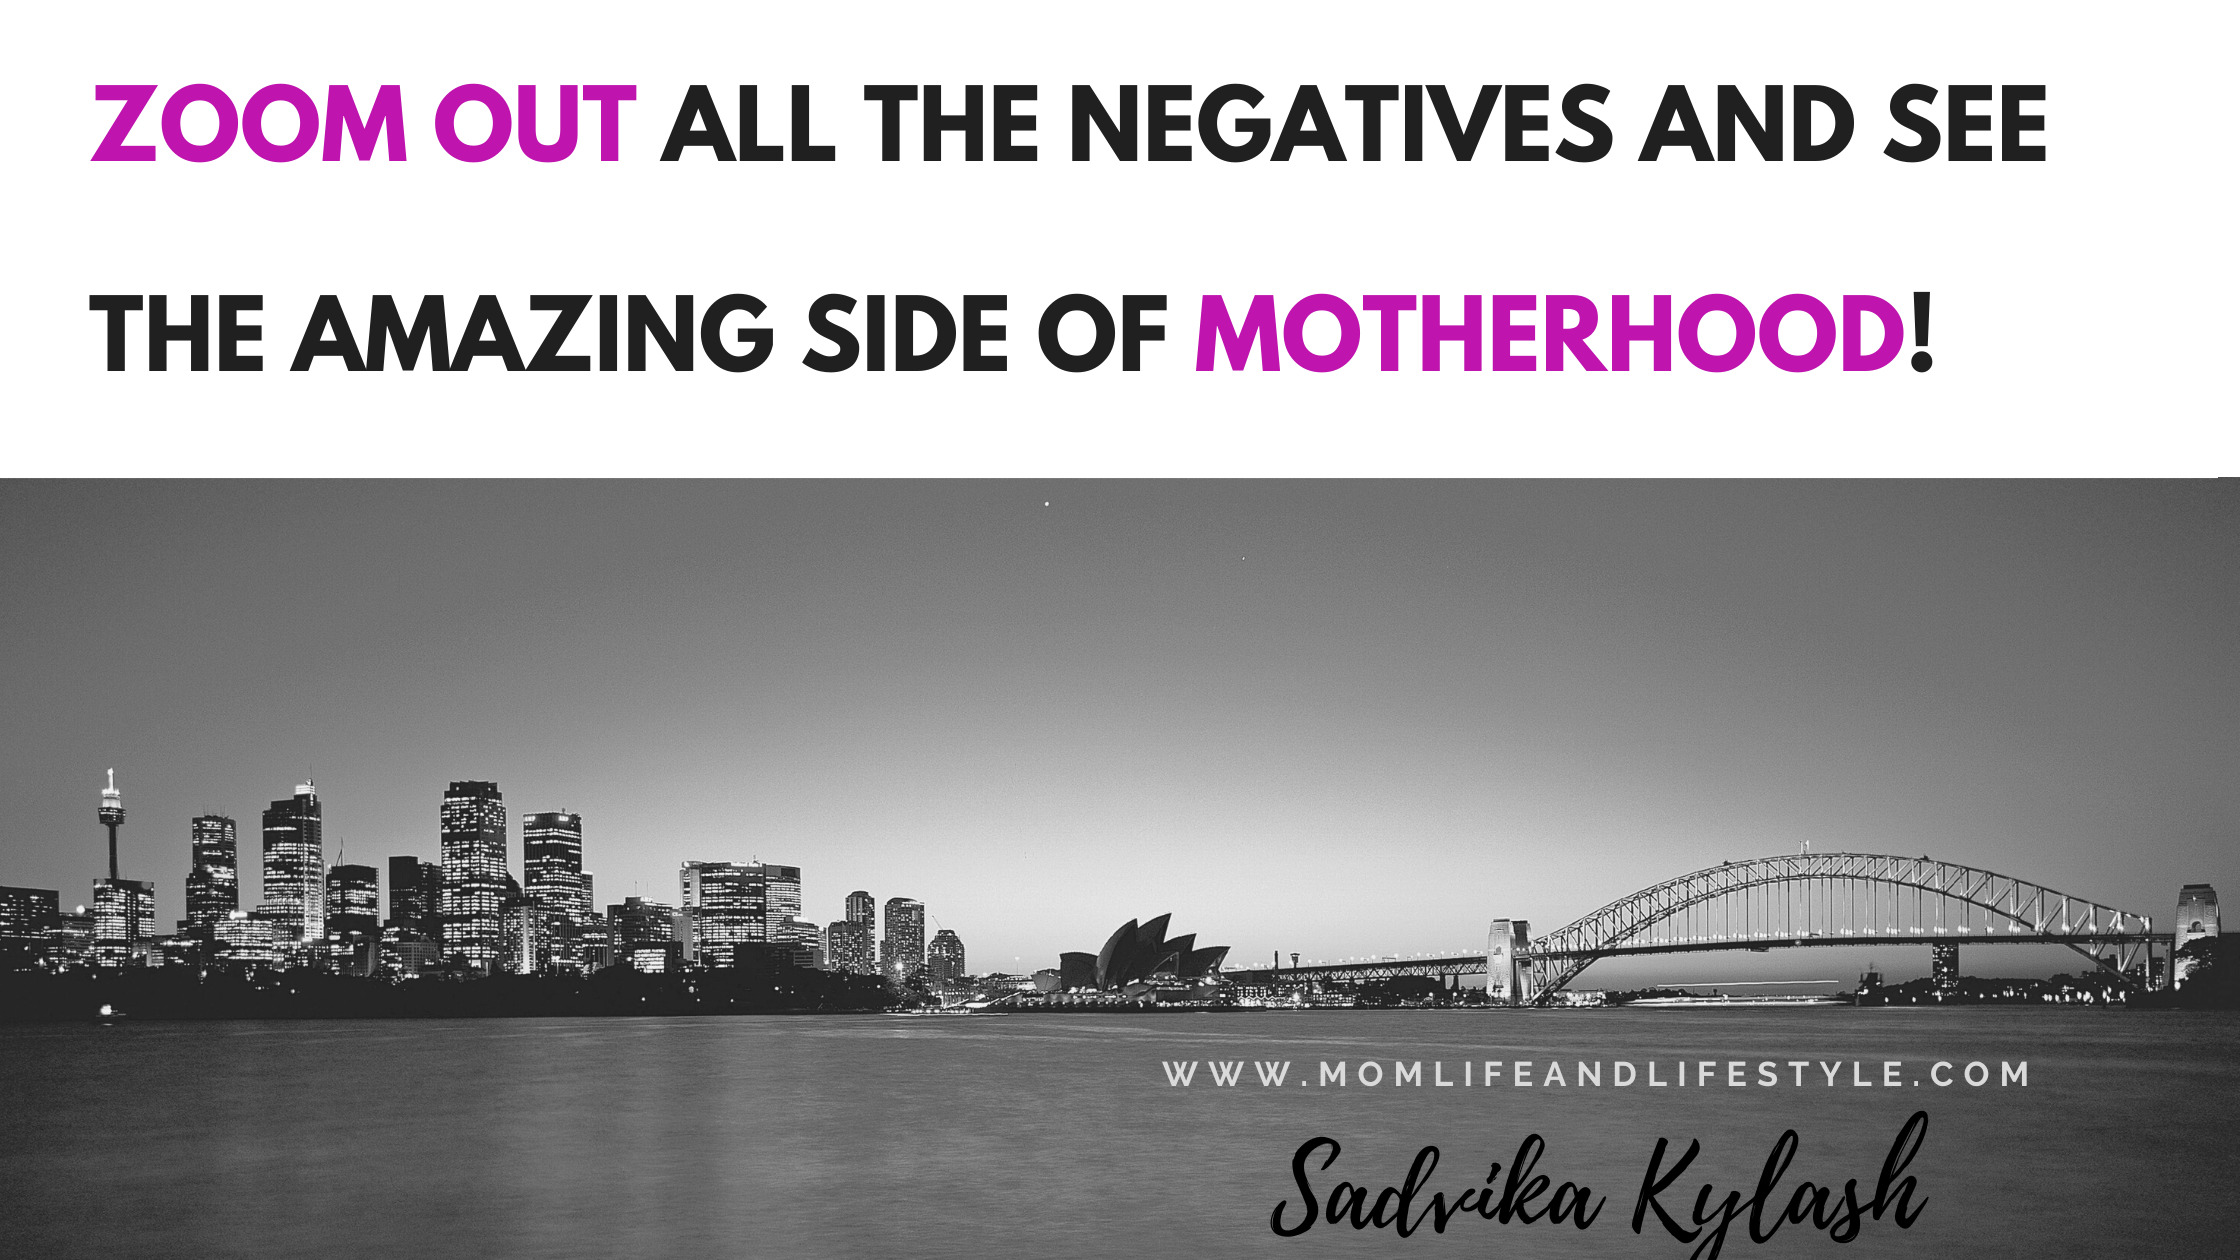 Zoom Out all the negative and see the bright side of Motherhood